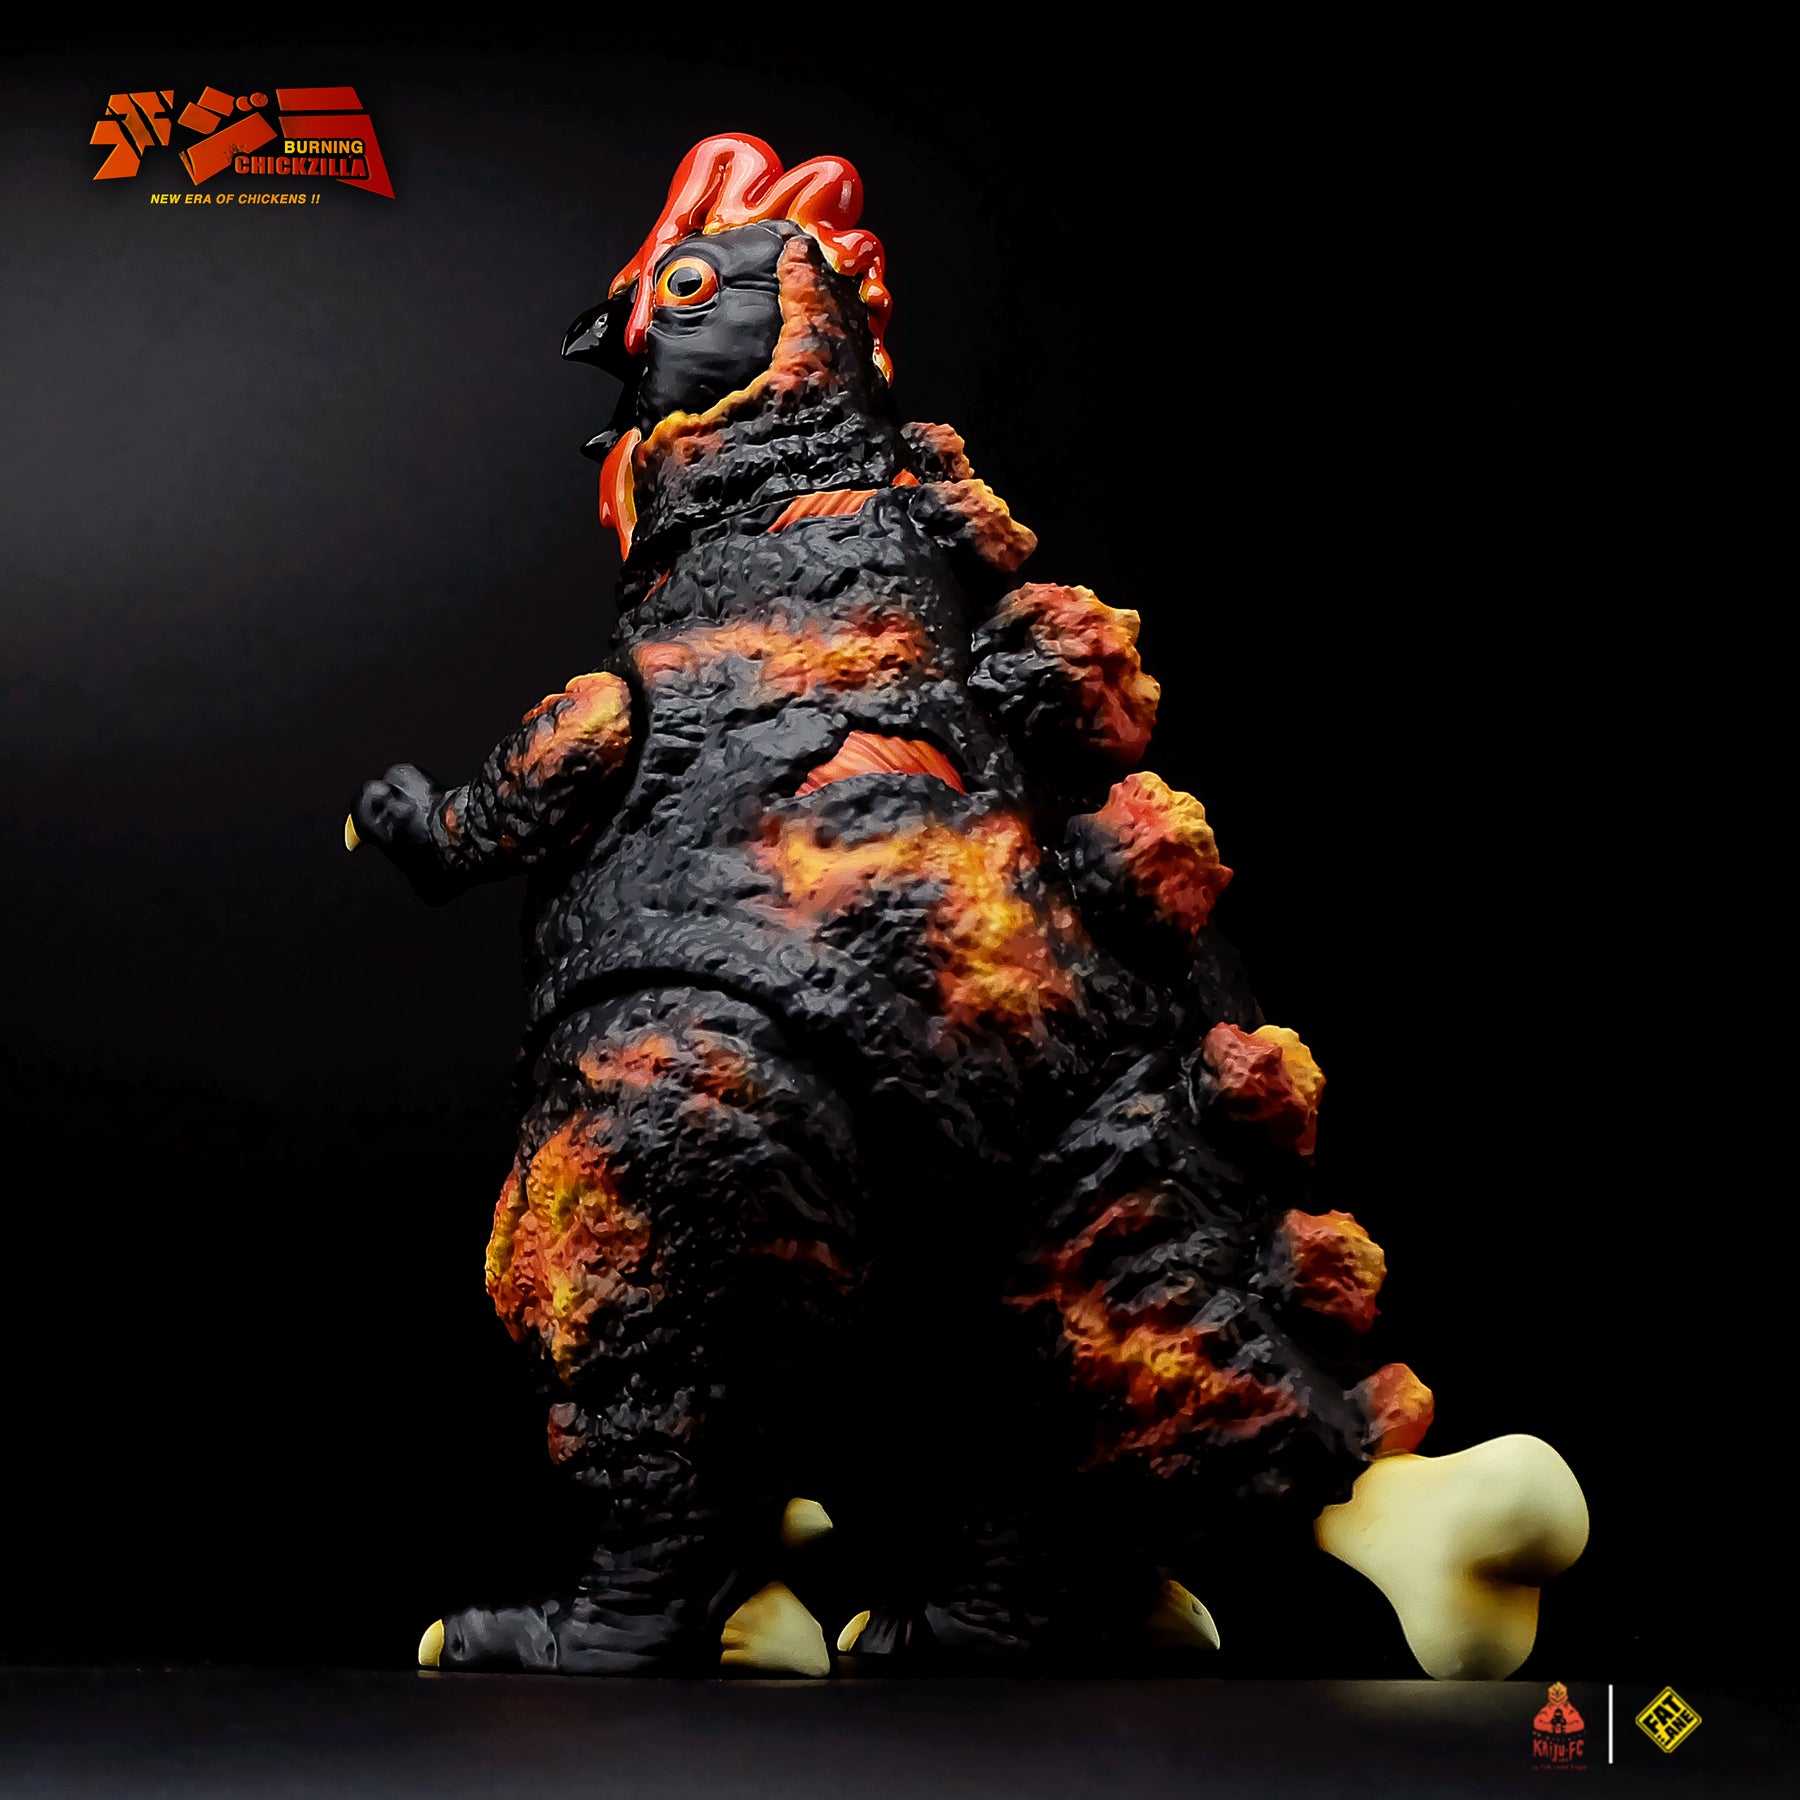 The ChickZilla (Burning Ver.) by Fat Lane